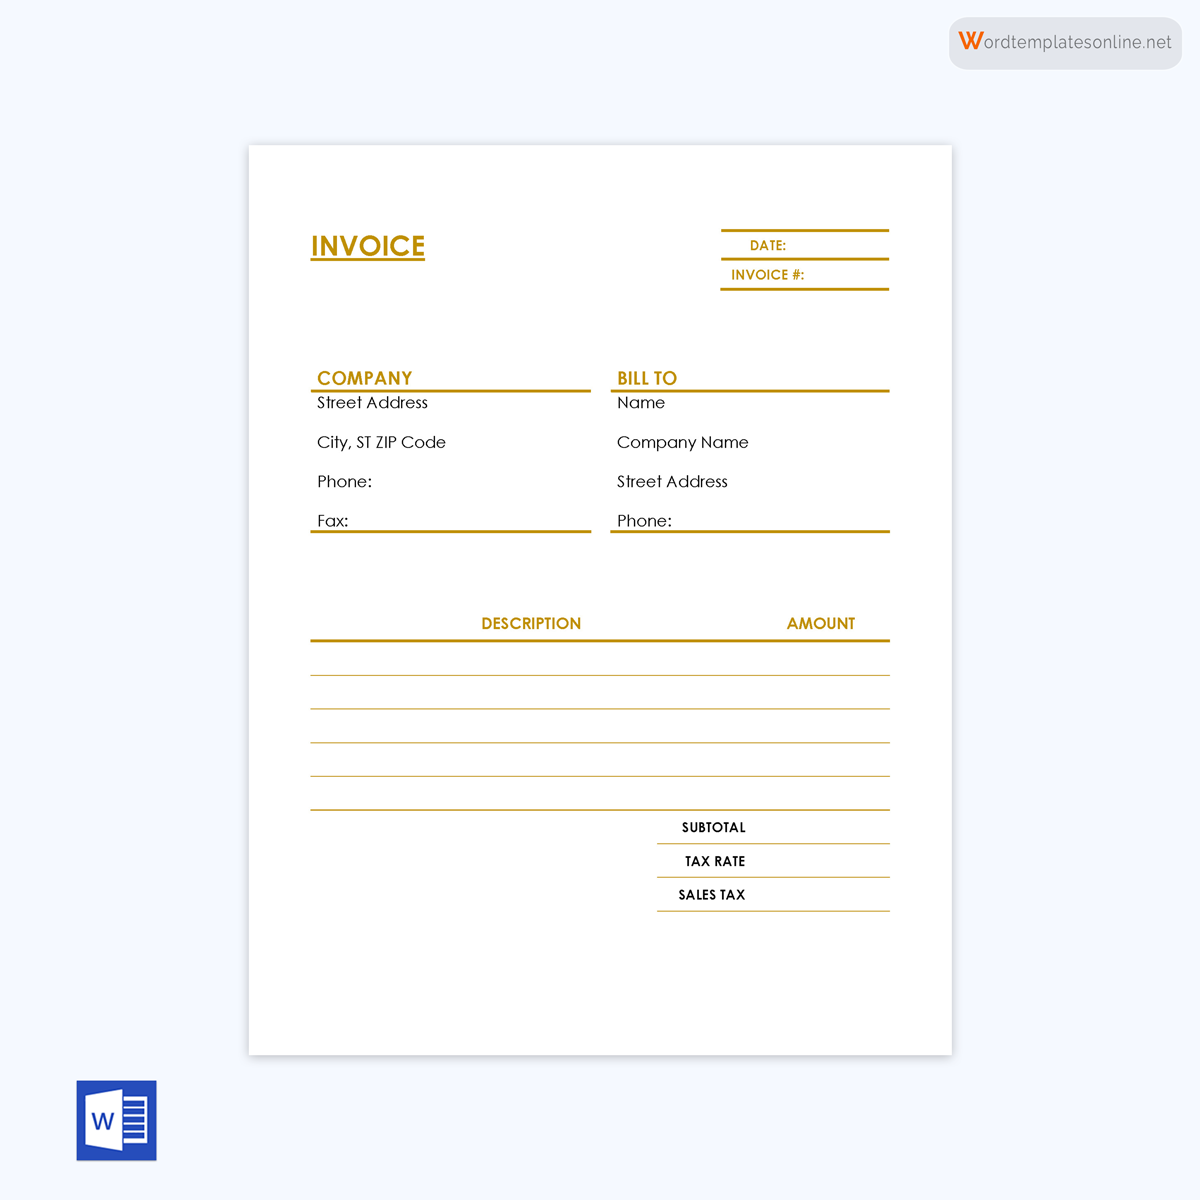 Printable invoice template example for editing